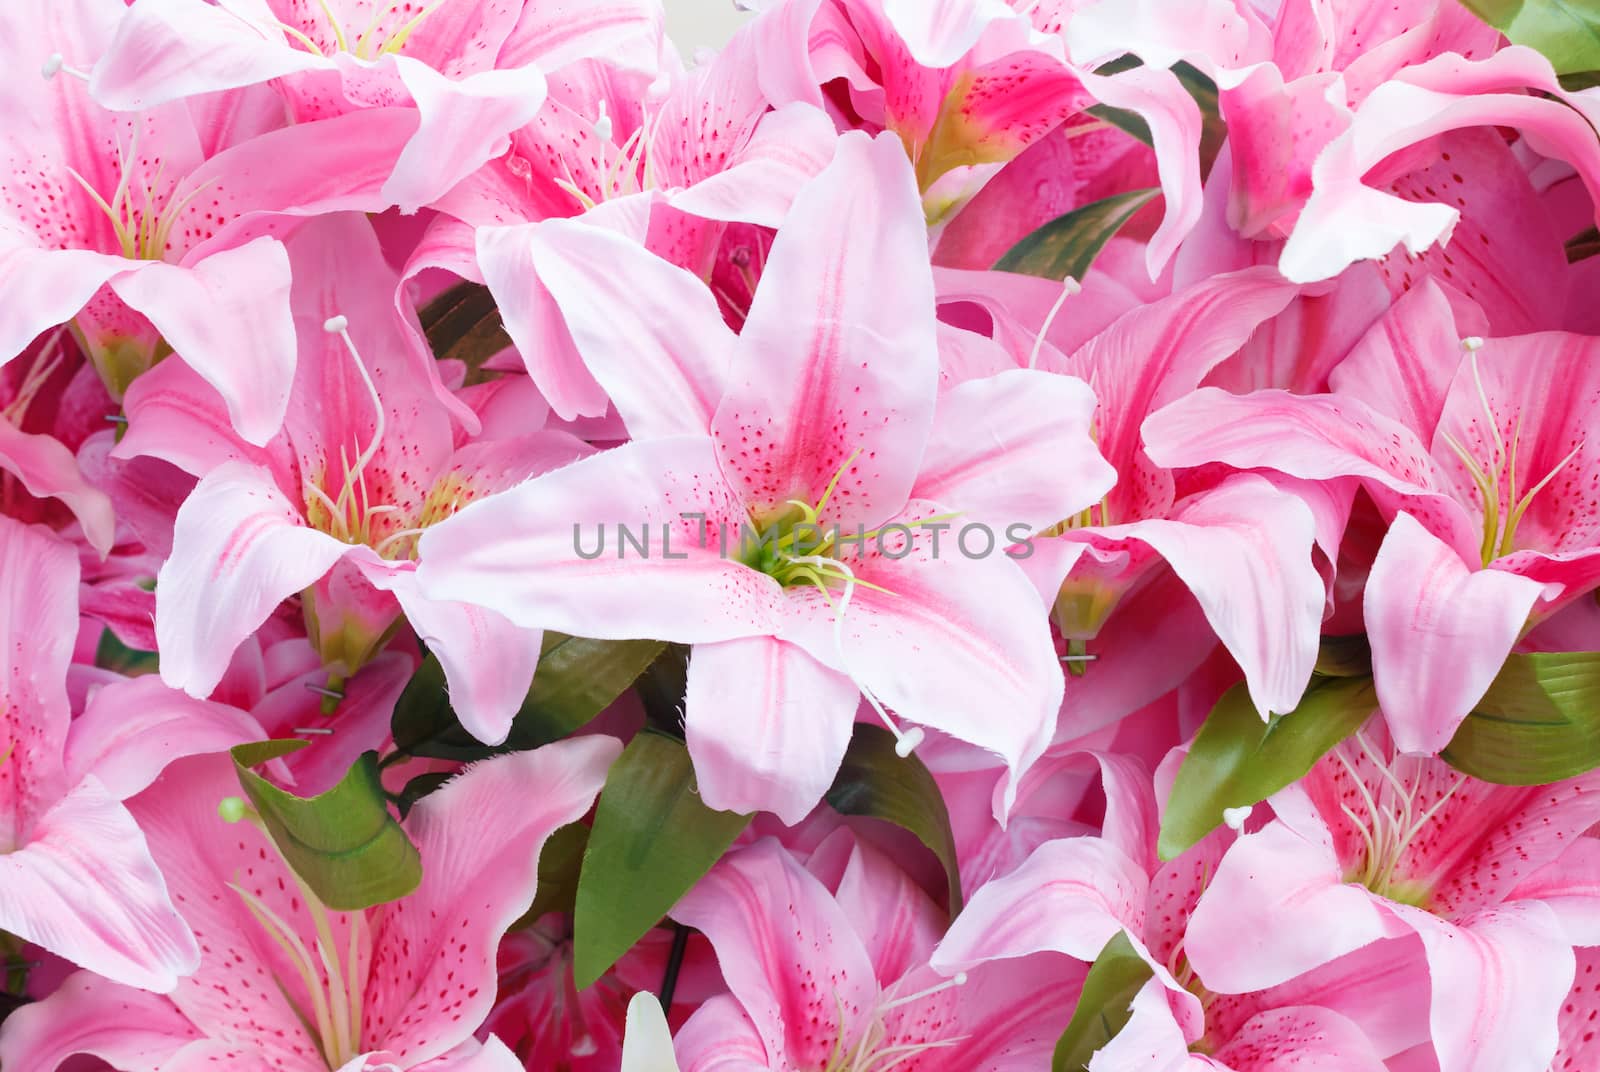 Artificial pink rain lily flowers for background